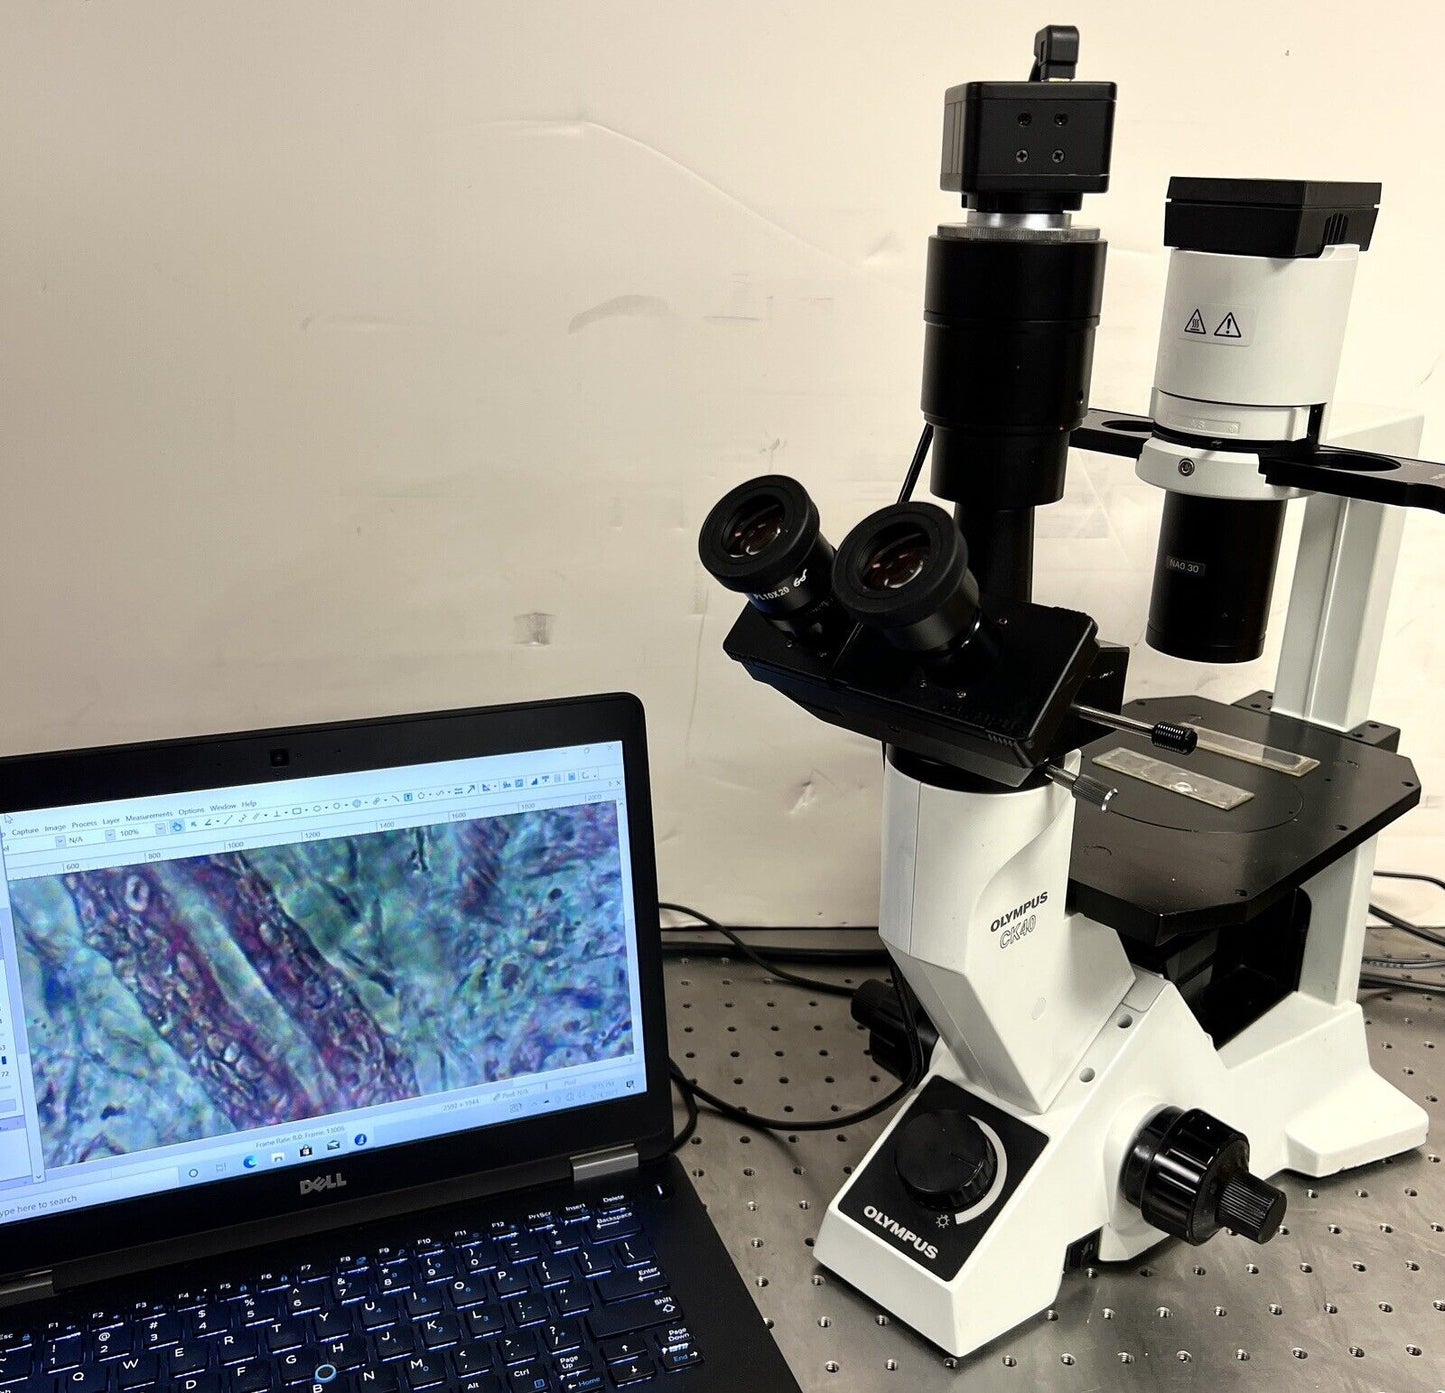 Olympus CK40 Inverted Phase Microscope with Cam + Laptop